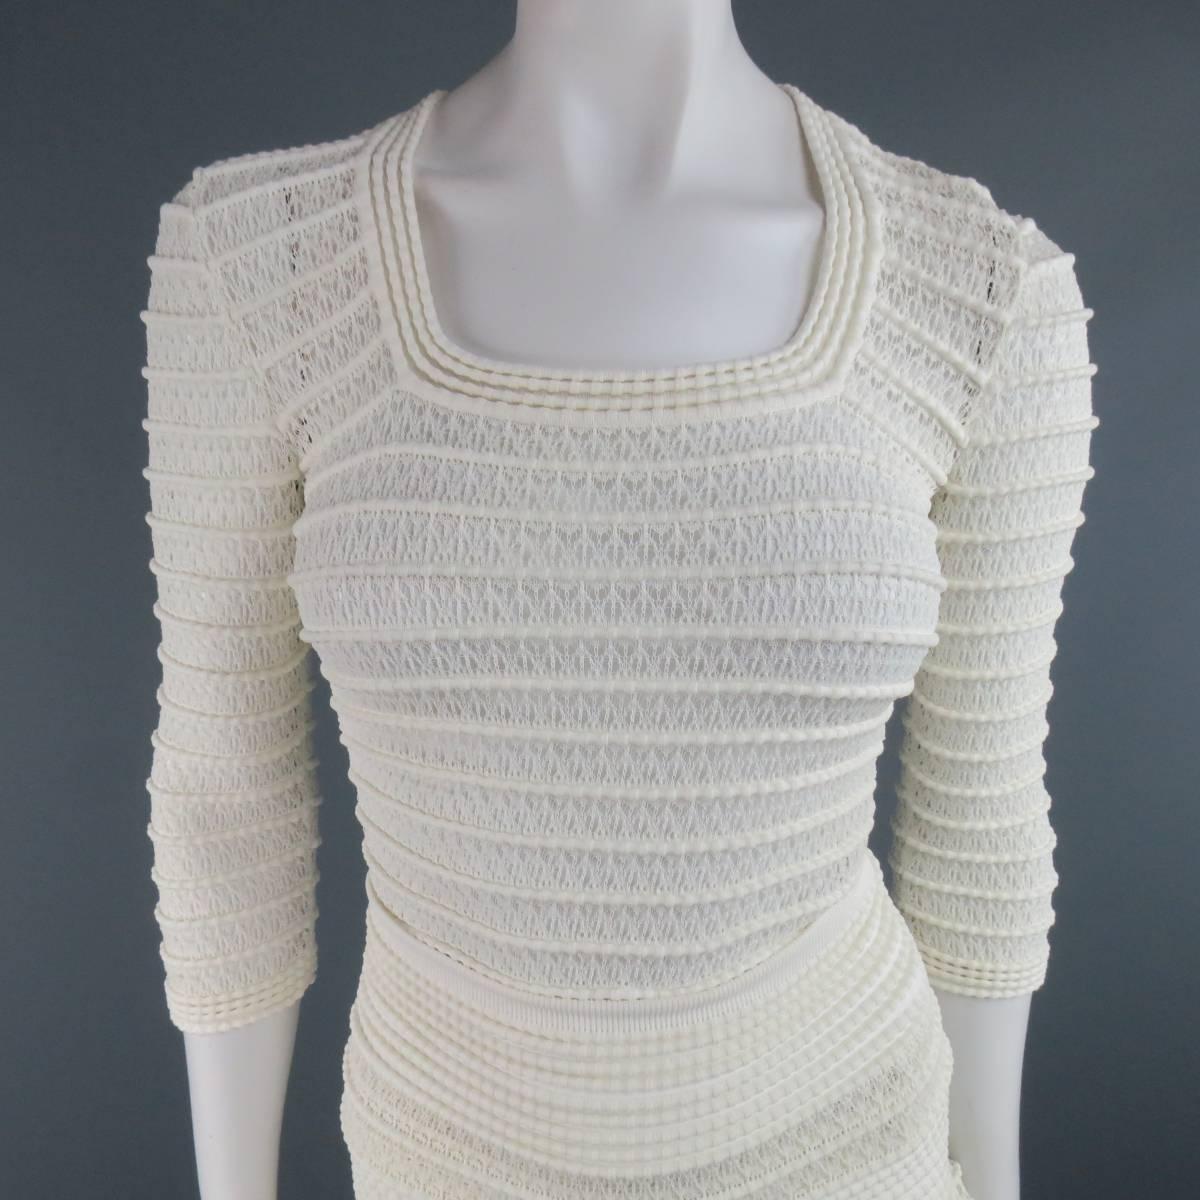 ALAIA skirt set in a creamy beige stripe textured viscose cotton mesh stretch knit includes a fitted, three quarter sleeve, scoop neck top and matching high rise, ruffled skirt. Made in Italy.
 
Excellent Pre-Owned Condition.
Marked: Top M, Skirt